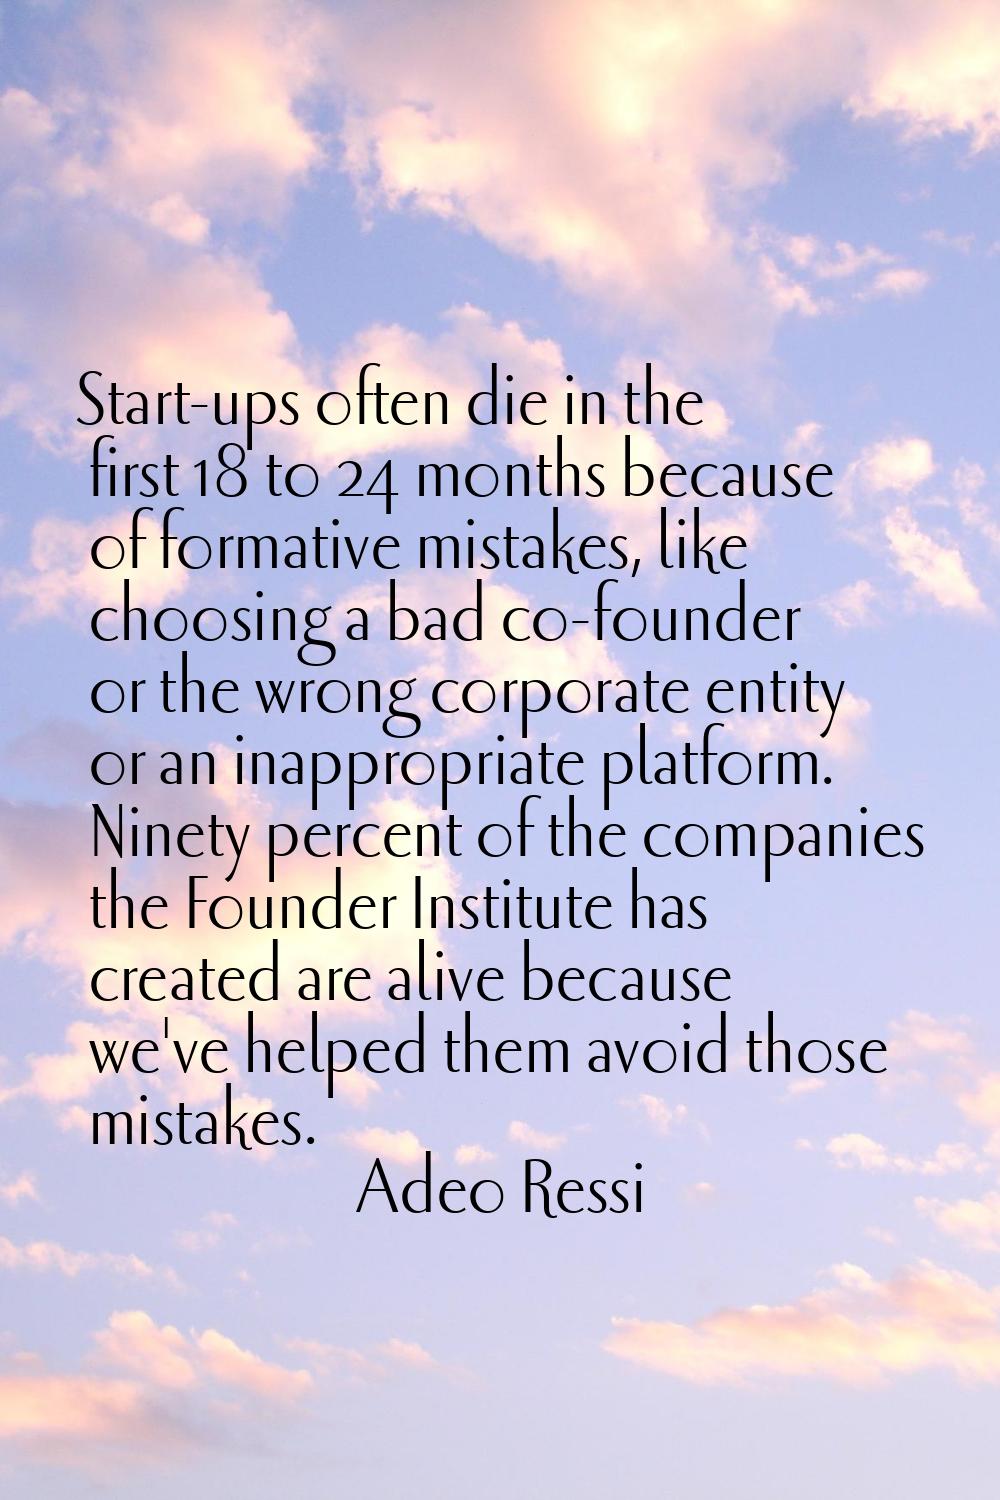 Start-ups often die in the first 18 to 24 months because of formative mistakes, like choosing a bad